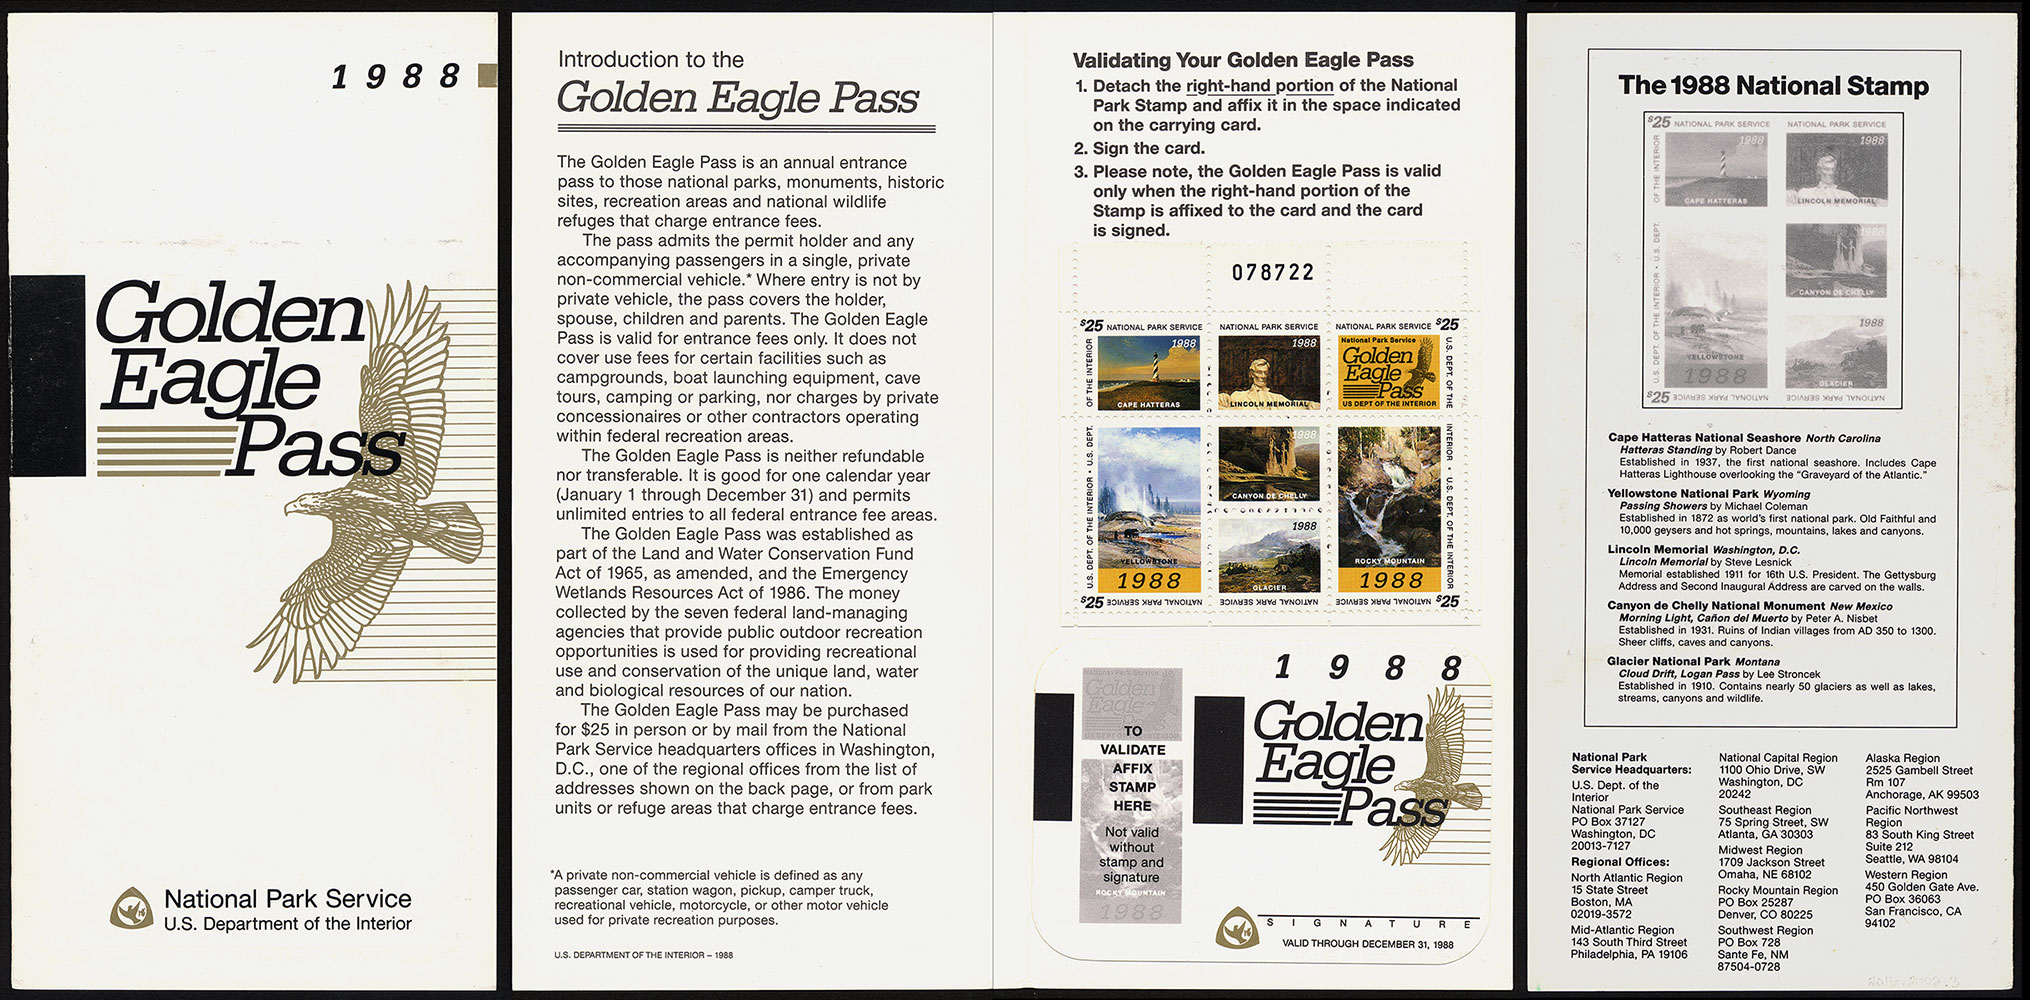 Four pages of the Golden Eagle Pass